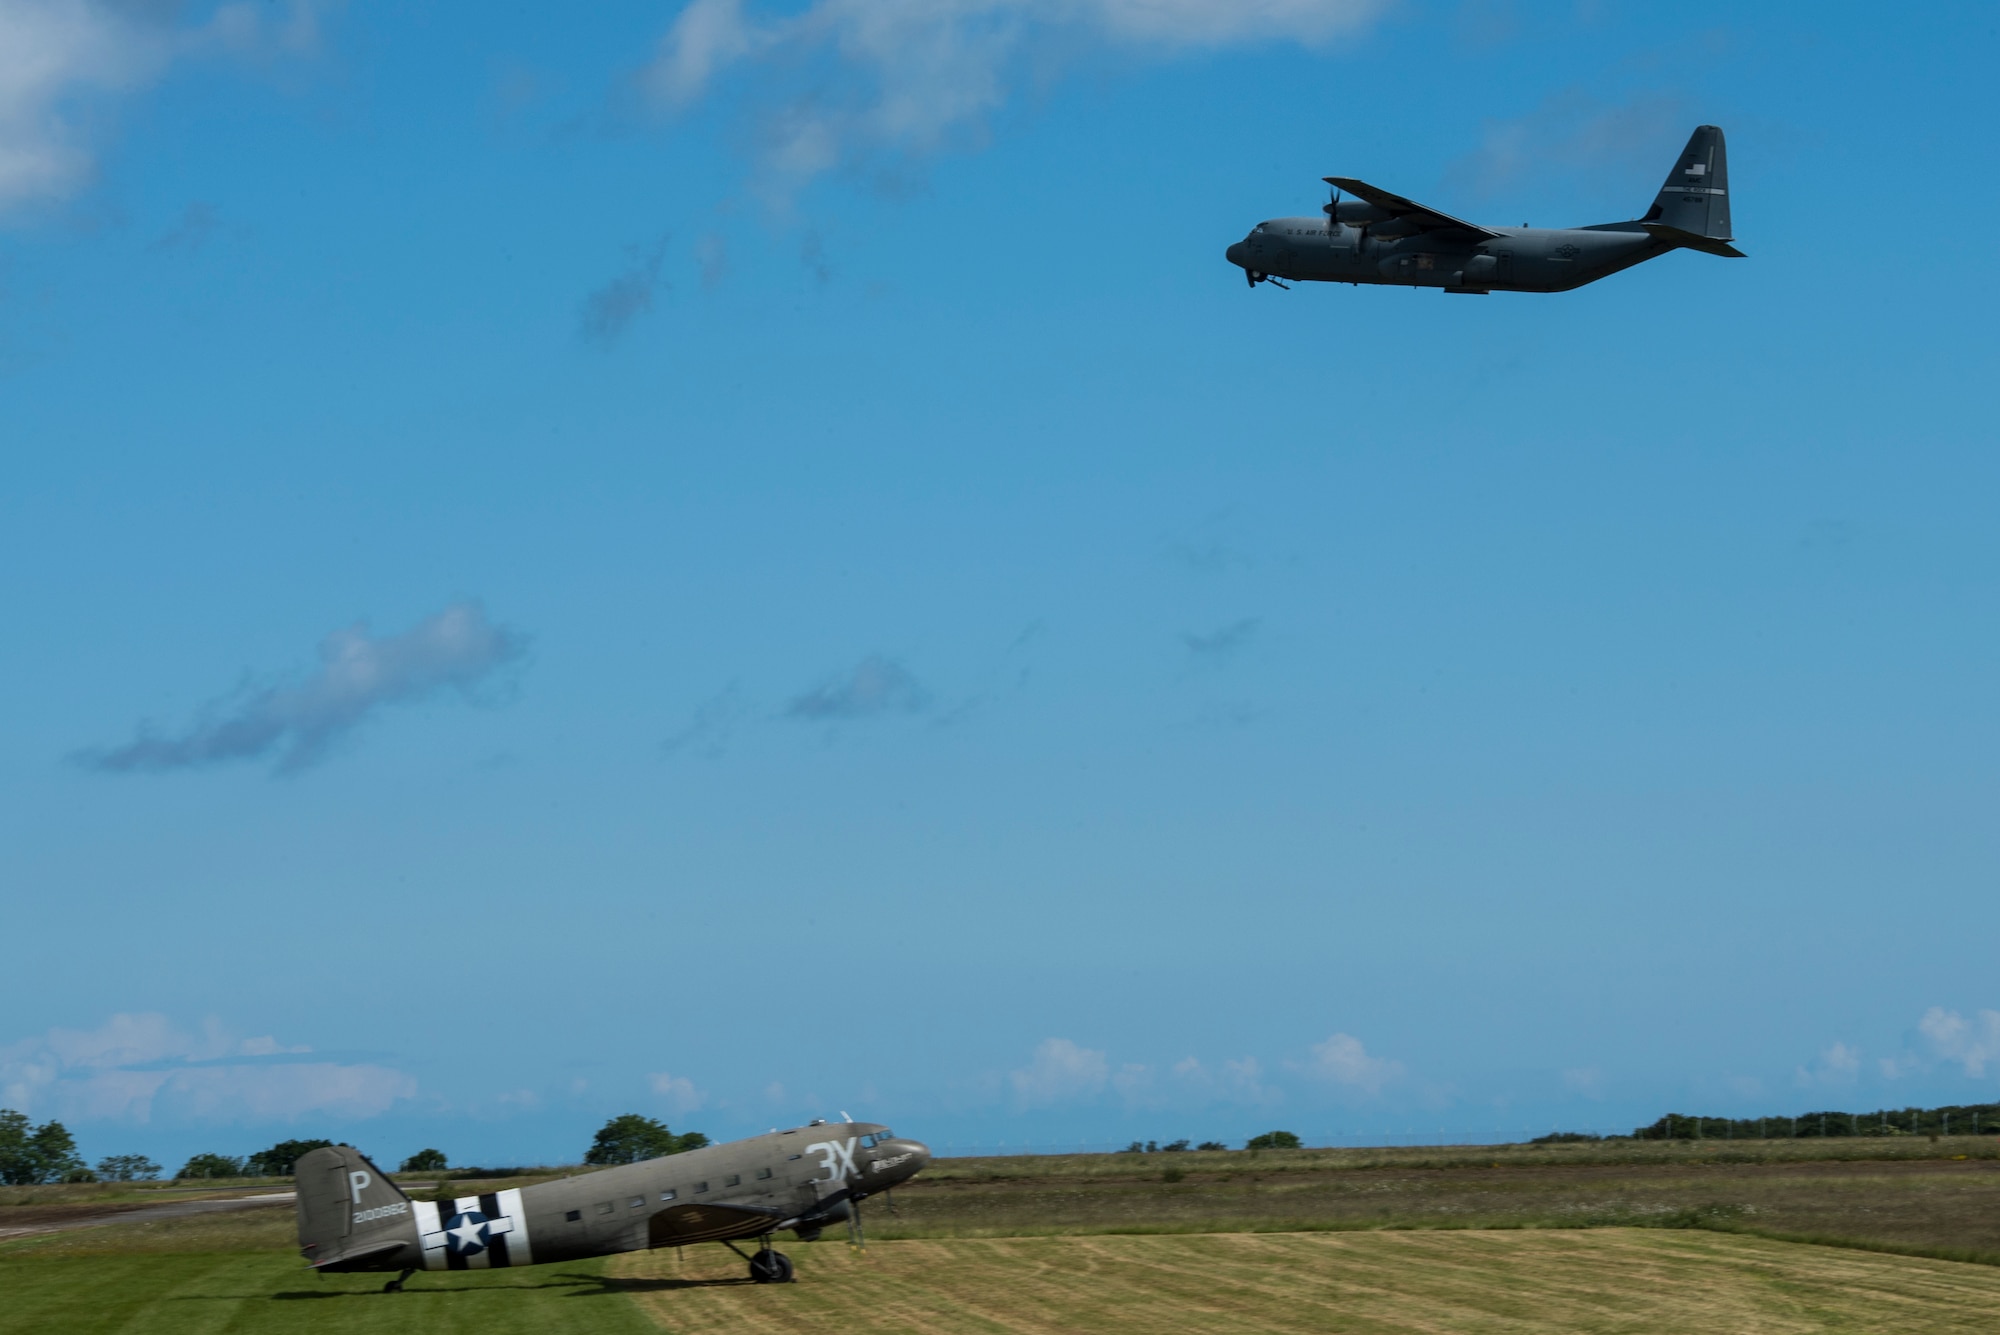 A U.S. Air Force C-130J Super Hercules, assigned to the 61st Airlift Squadron, Little Rock Air Force Base, Ark., flies over a Douglas C-47 Dakota at Cherbourg-Maupertus Airport, France, June 6, 2019. The 61st AS, draws lineage from the 61st Troop Carrier Squadron, which flew C-47s during the invasion of Normandy, 75 years ago. (U.S. Air Force photo by Senior Airman Devin M. Rumbaugh)